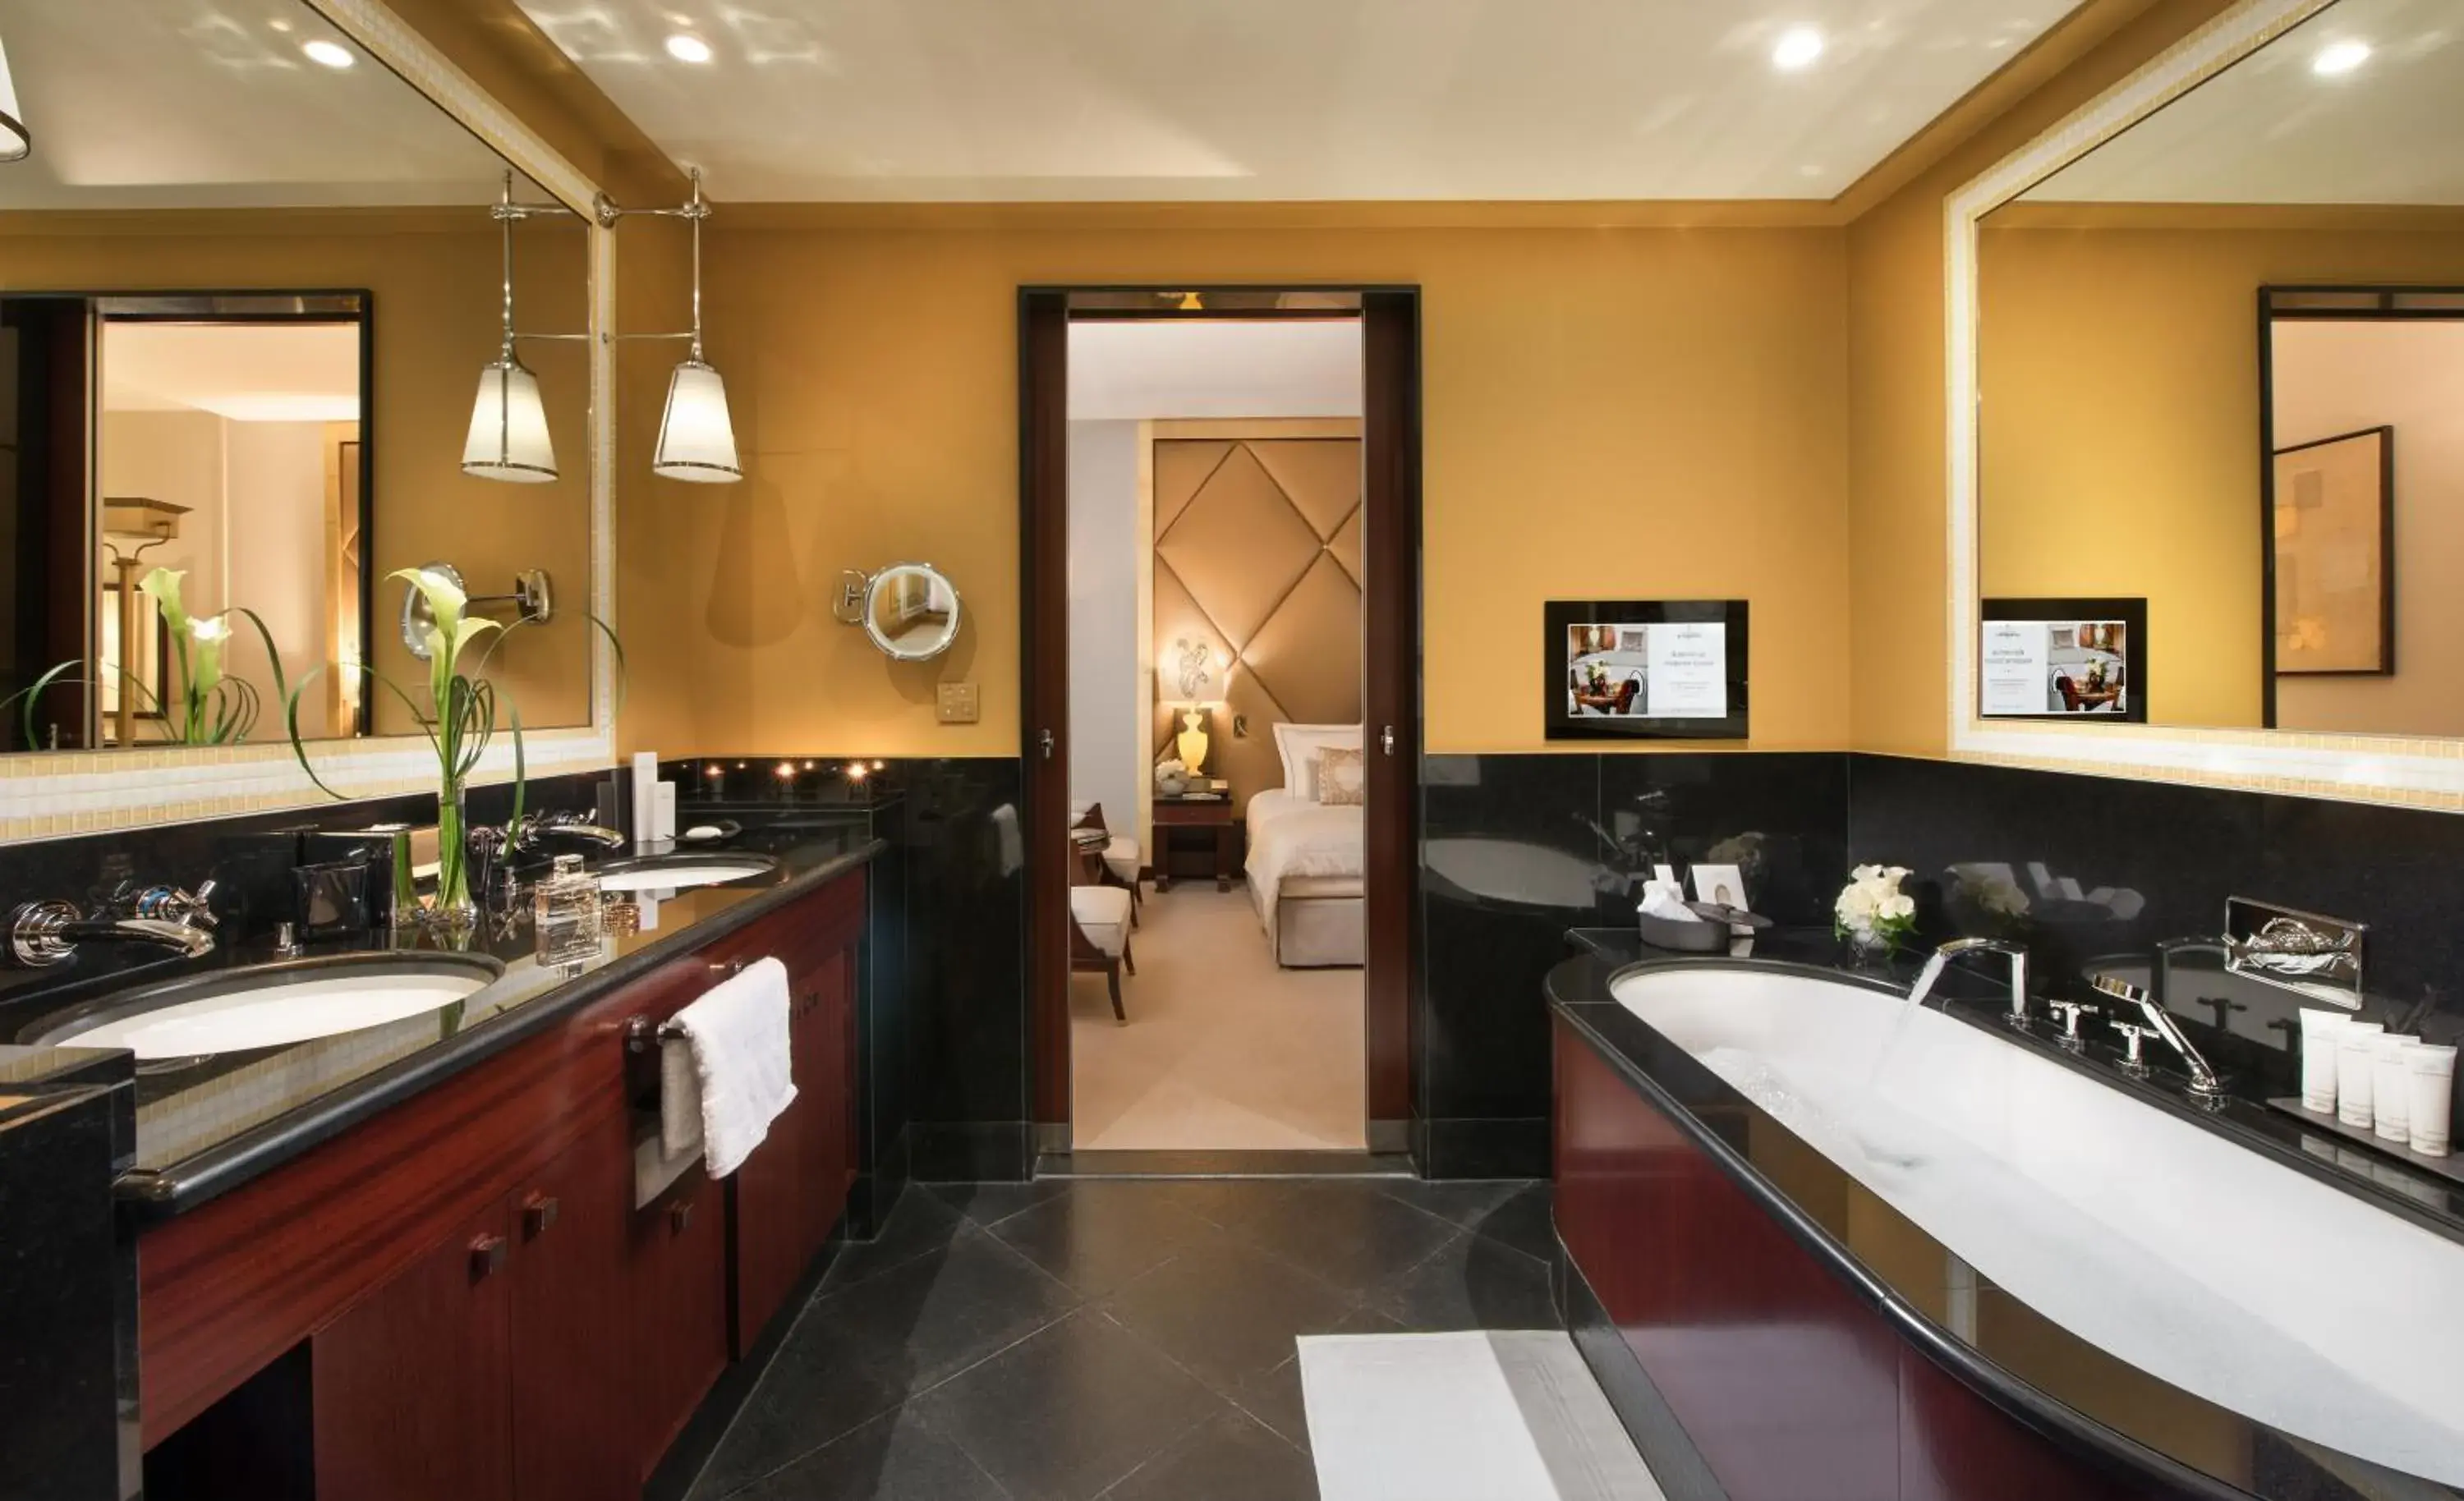 Bathroom in Hotel Barriere Le Fouquet's